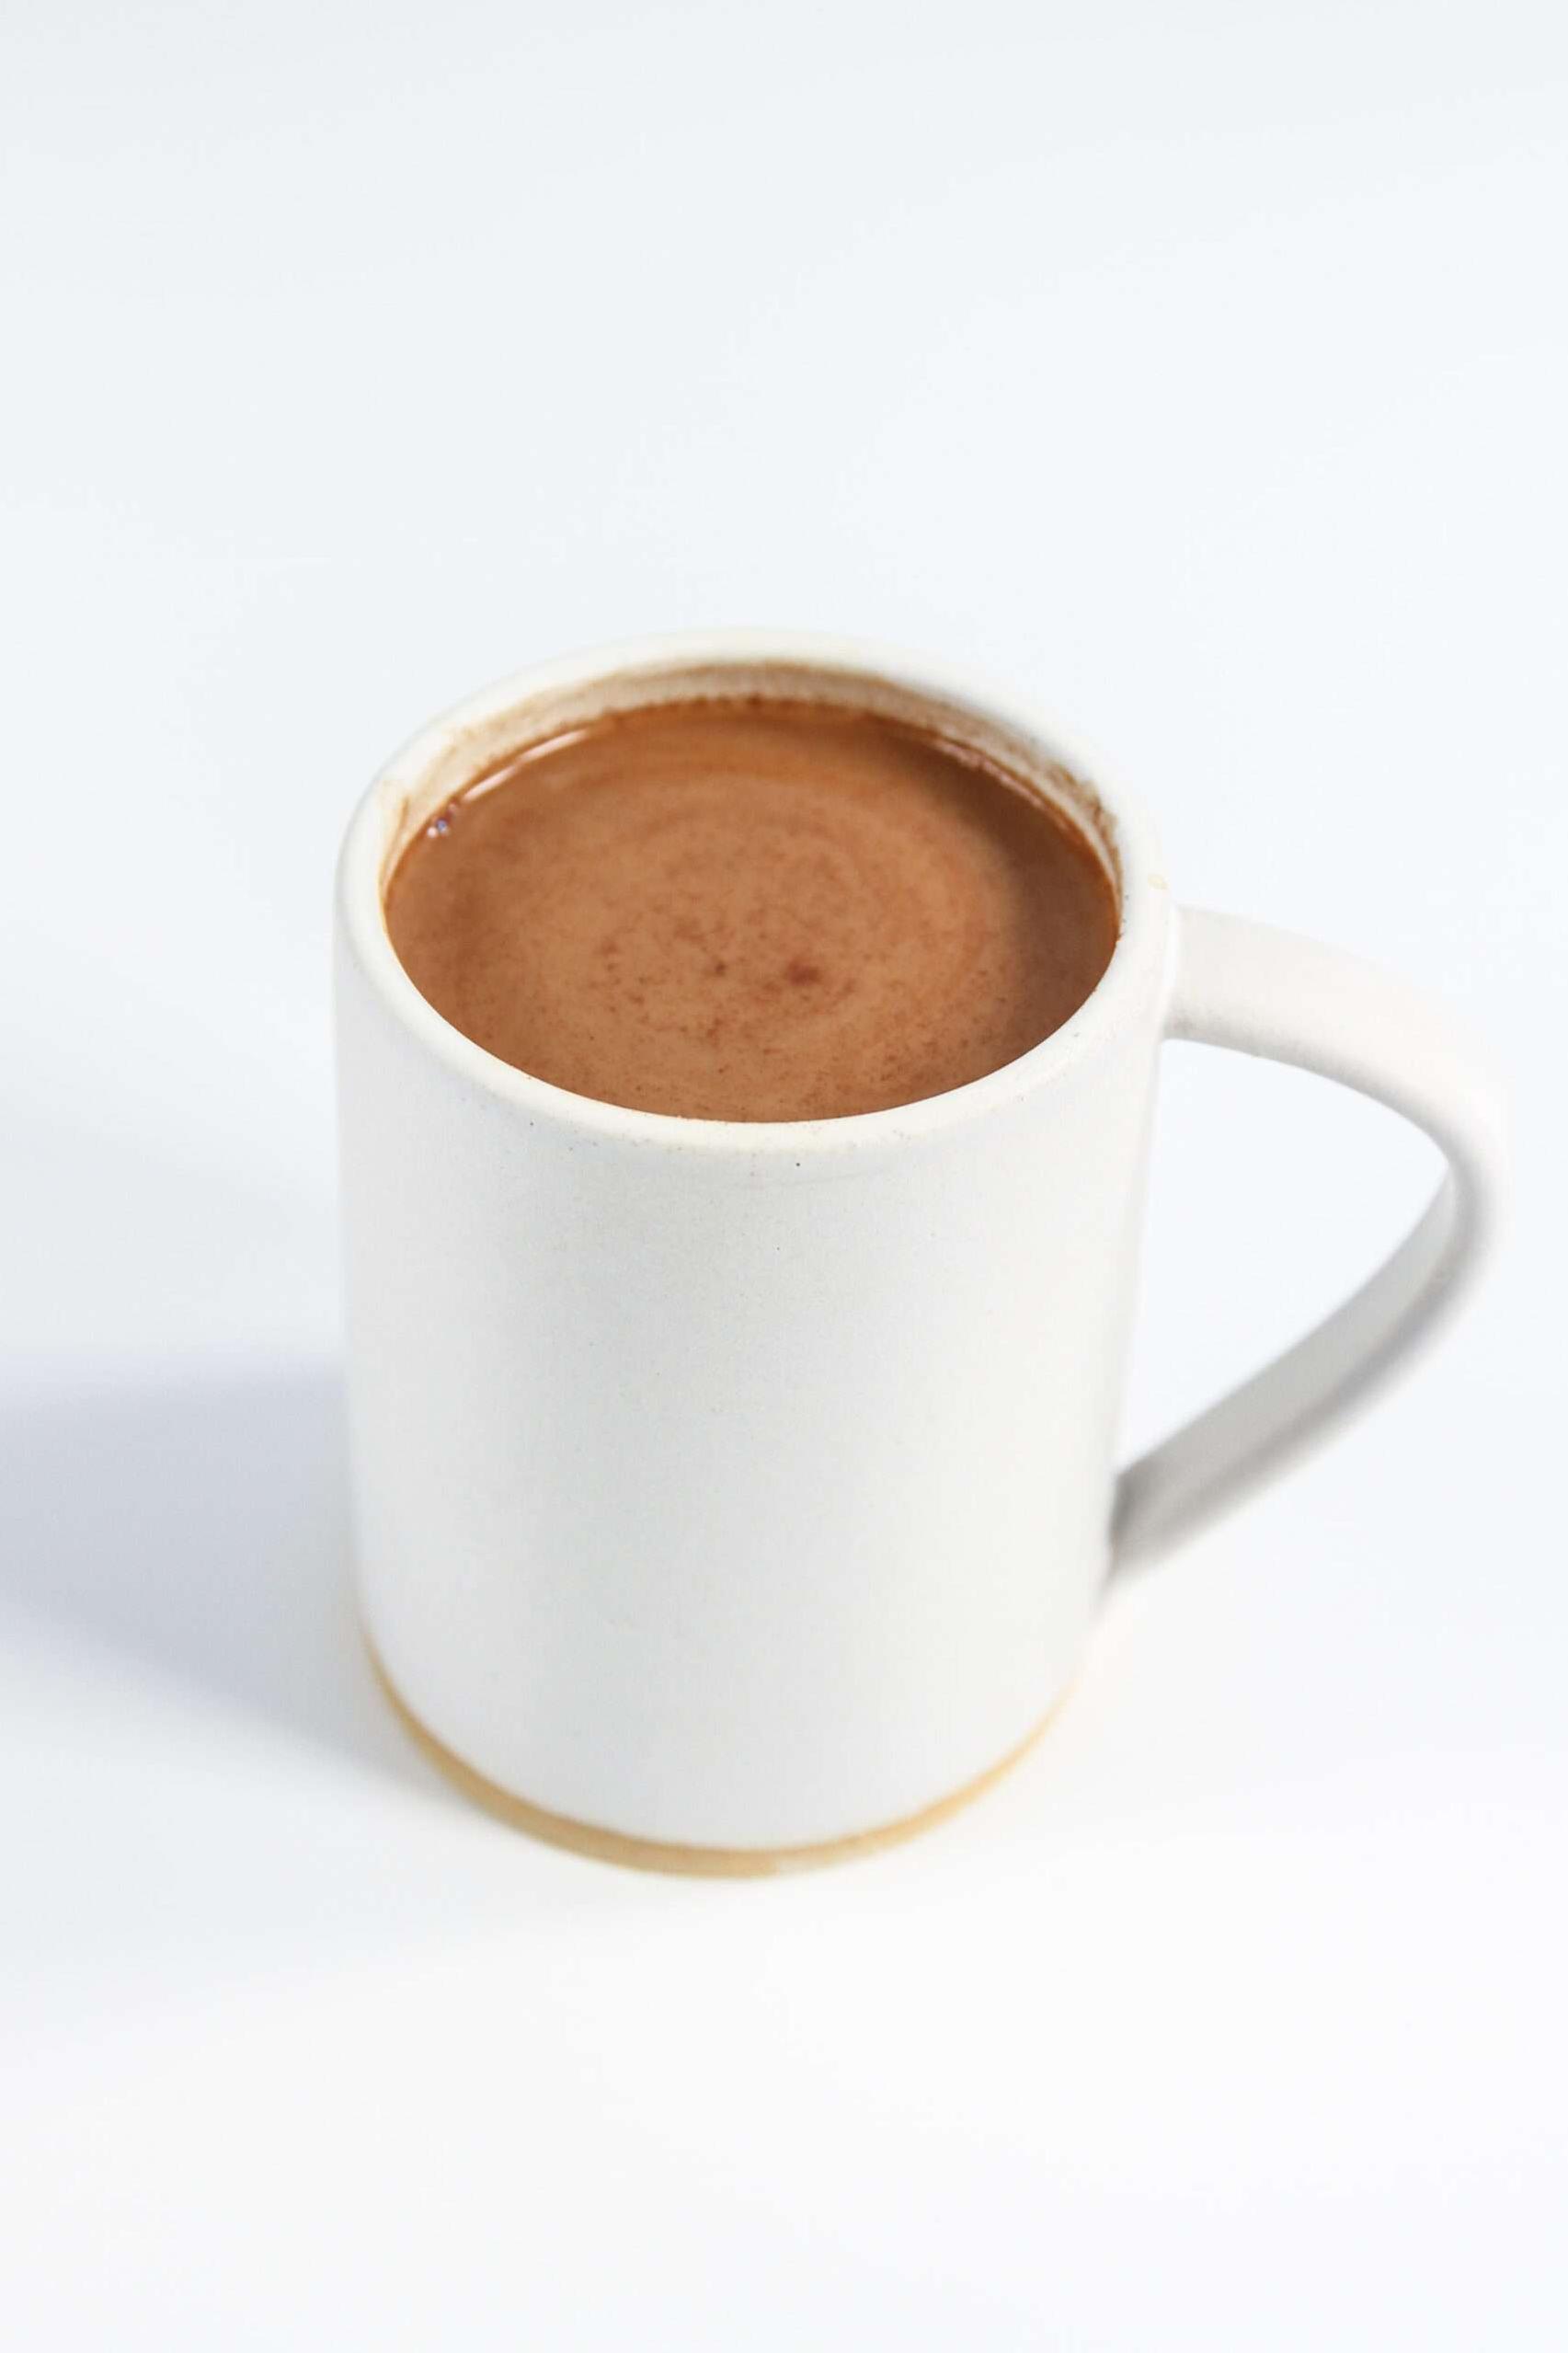  Warm your soul with this mocha